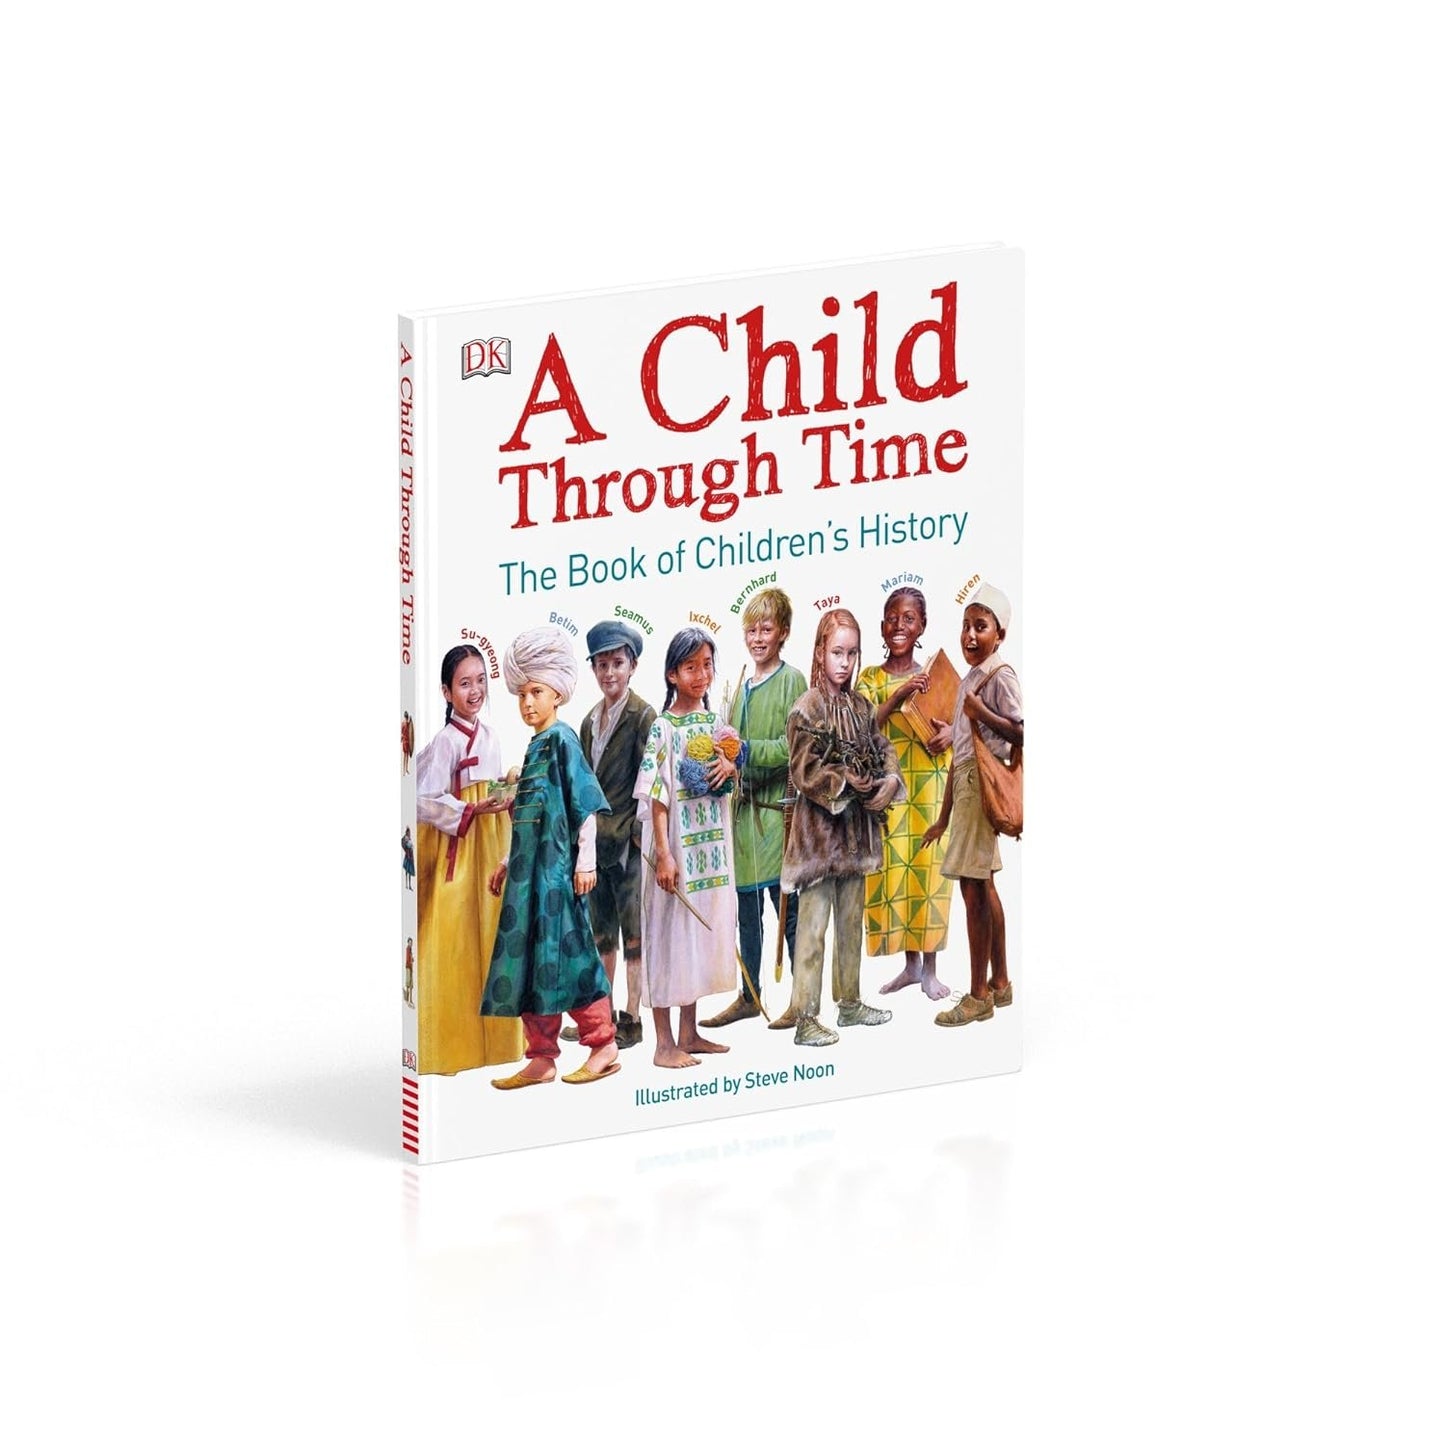 A Child Through Time: The Book of Children's History (DK Panorama)